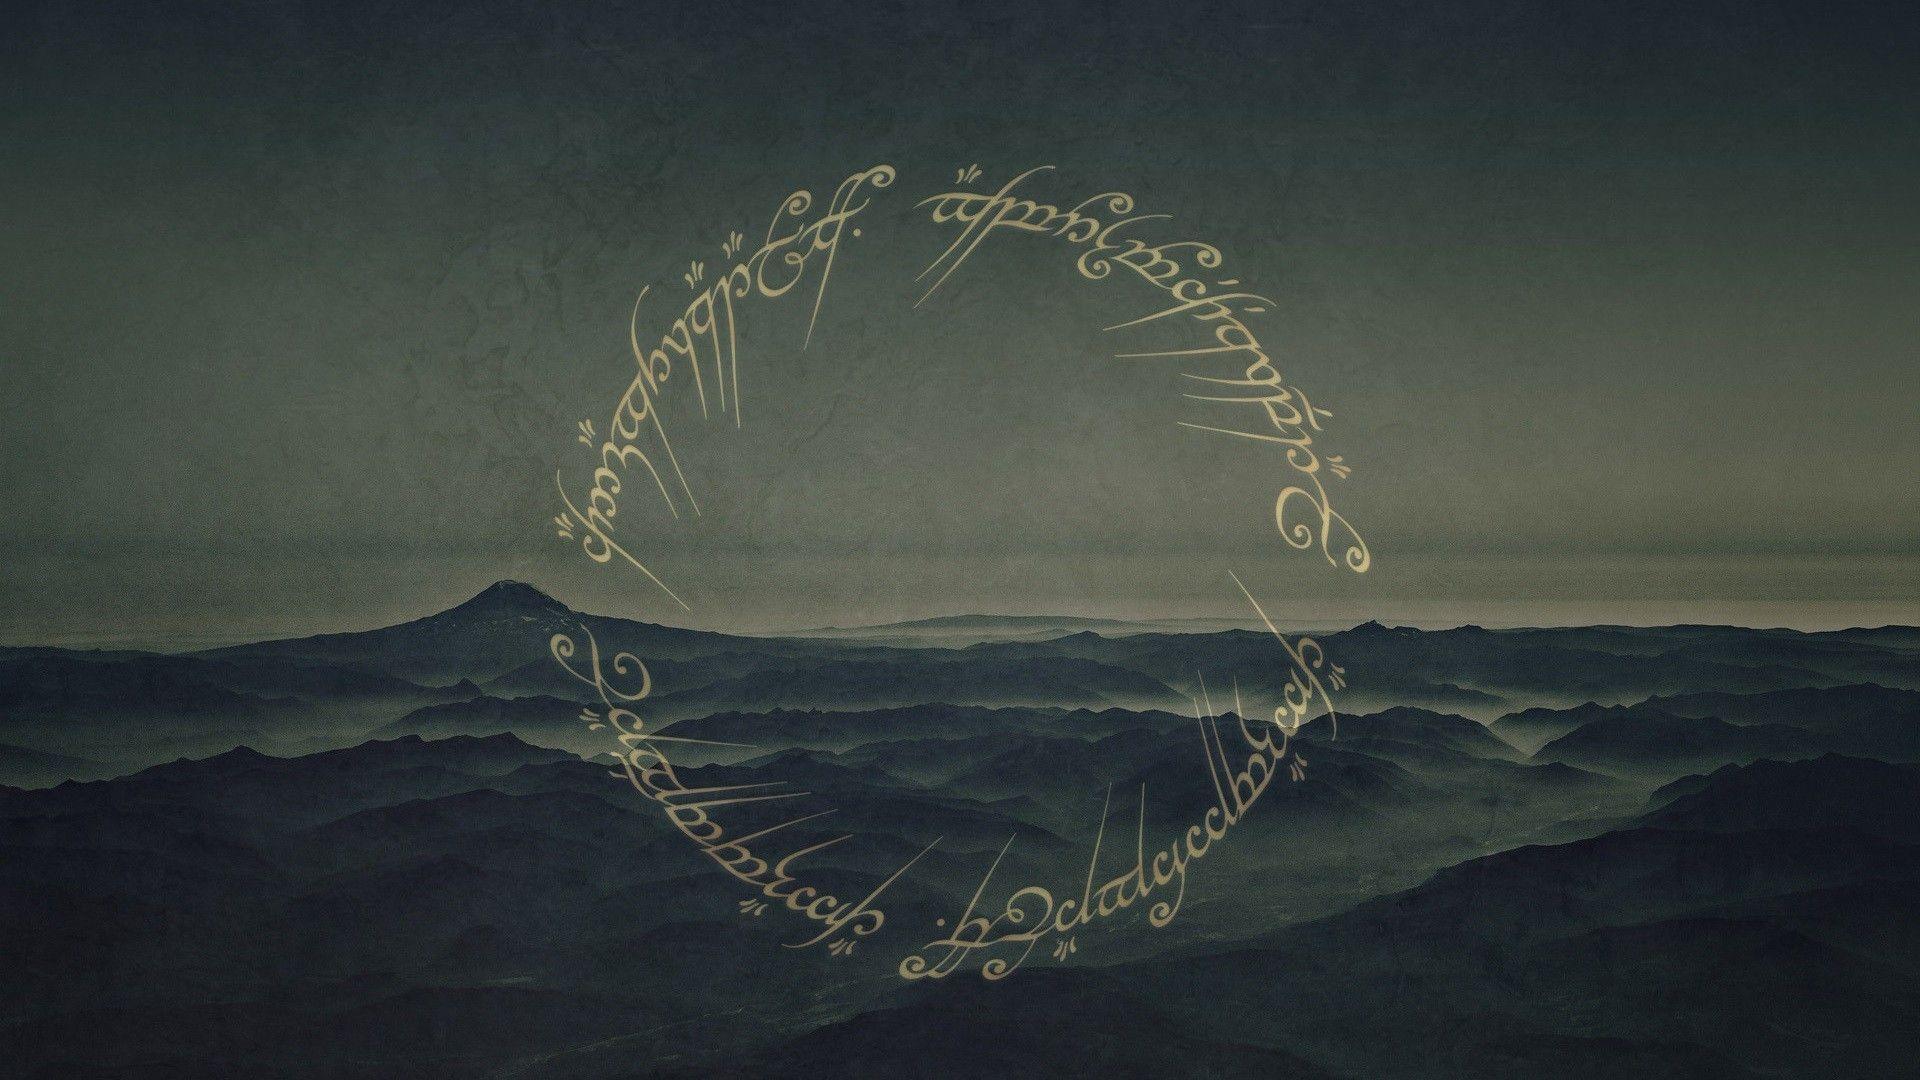 Awesome Lord of the Rings Wallpaper. Lord of the rings, One ring, Lotr